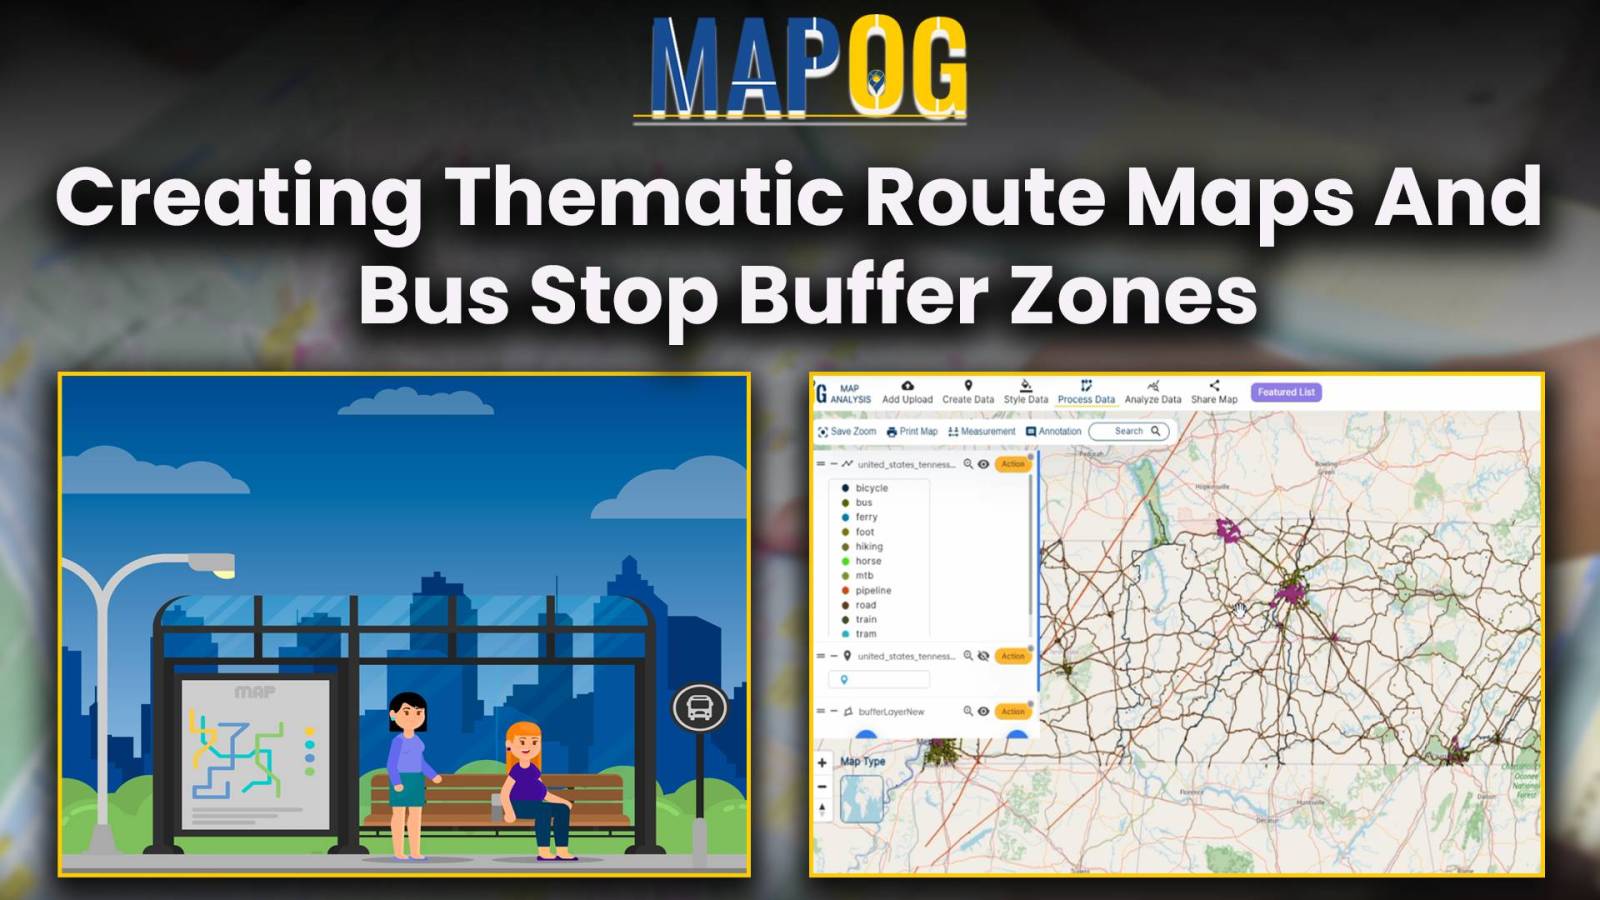 Creating Thematic Route Maps and Bus Stop Buffer Zones